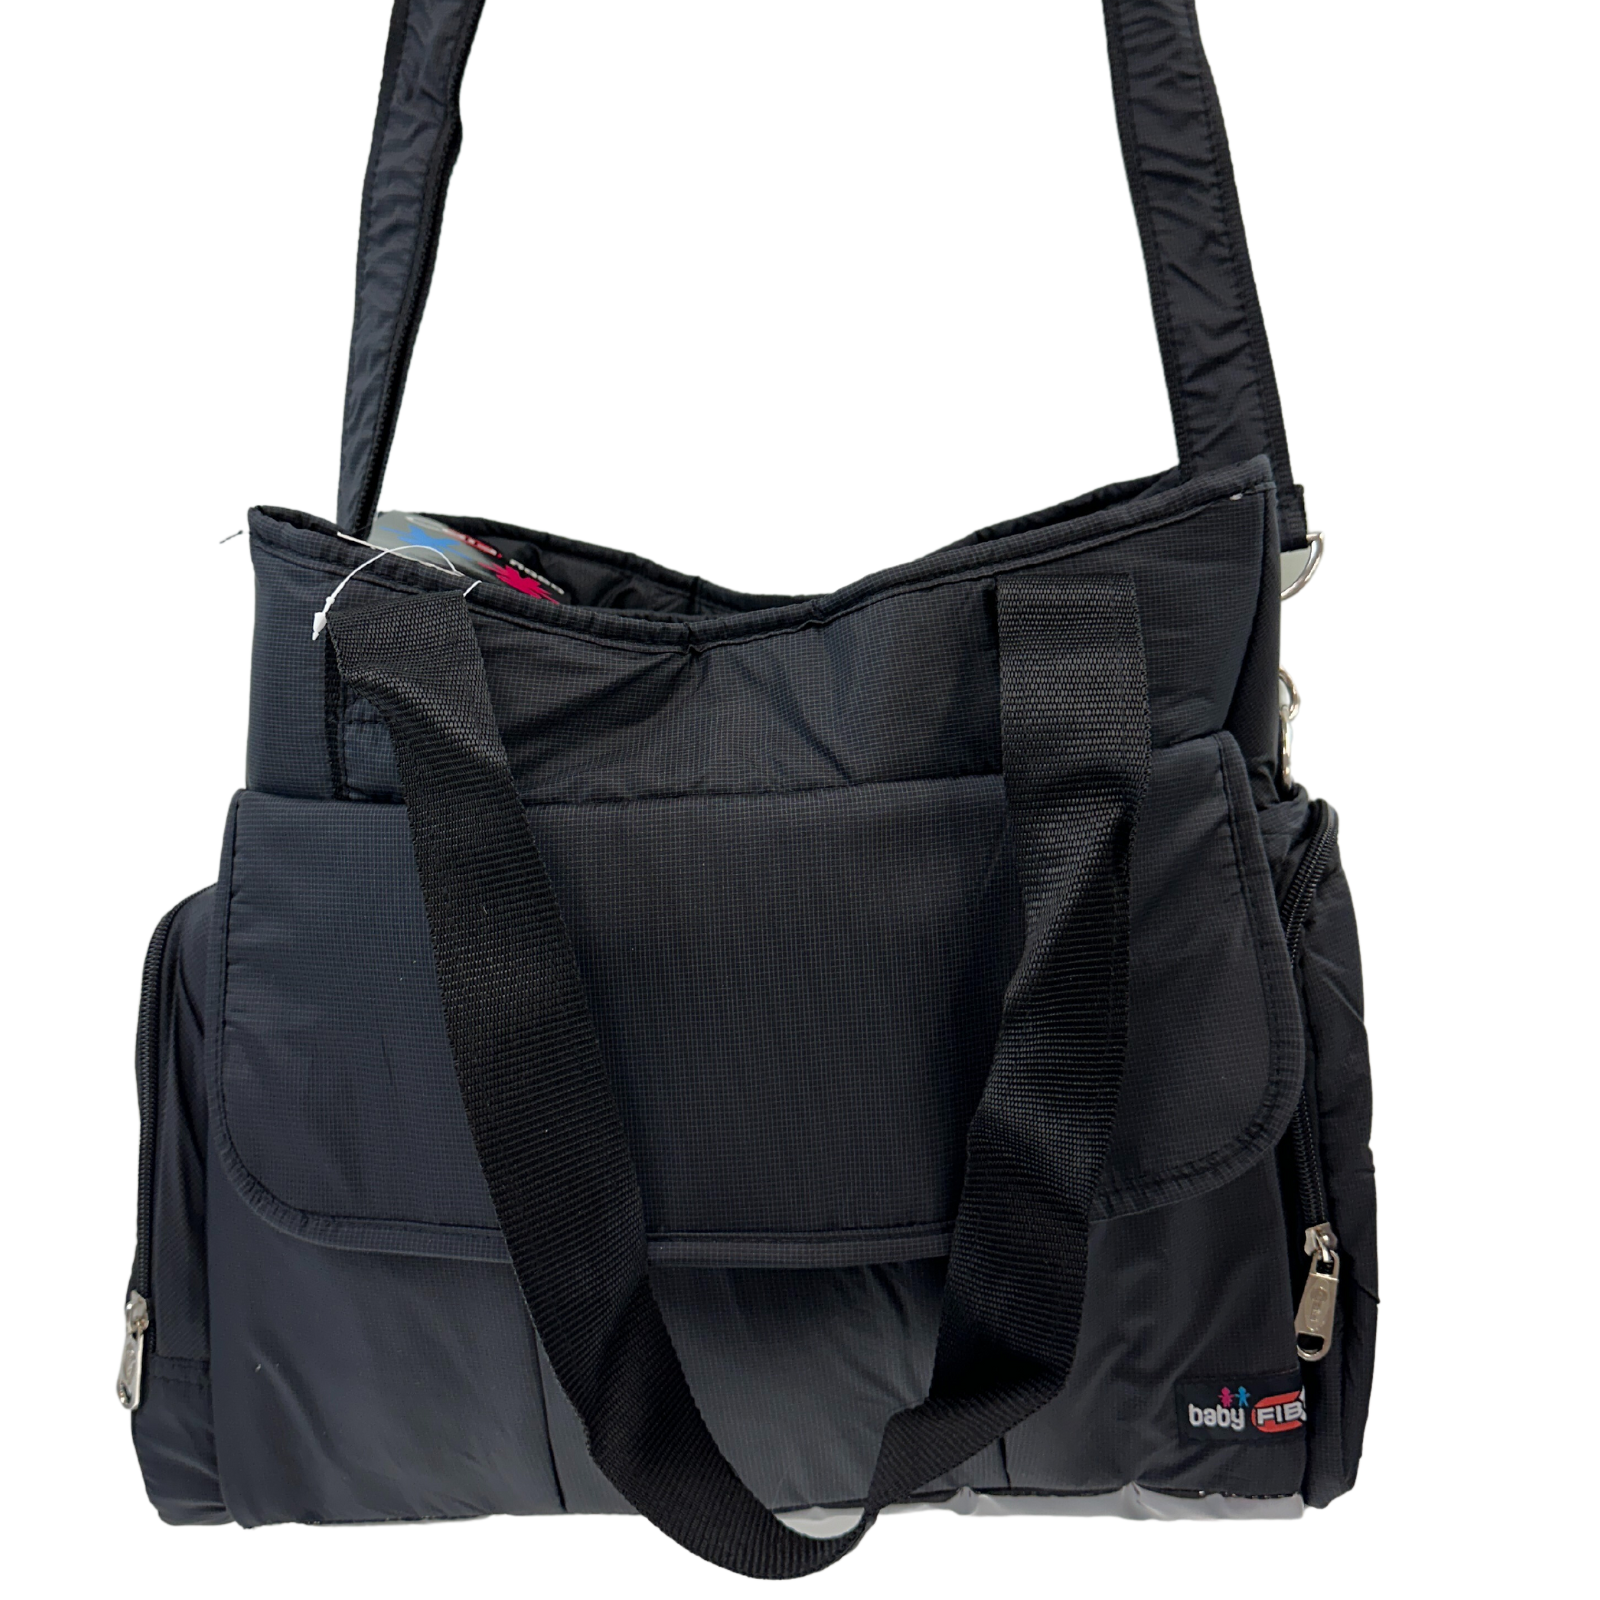 Baby Nappy Bag Diaper Maternity Milk Mummy Changing Travel Tote - Black